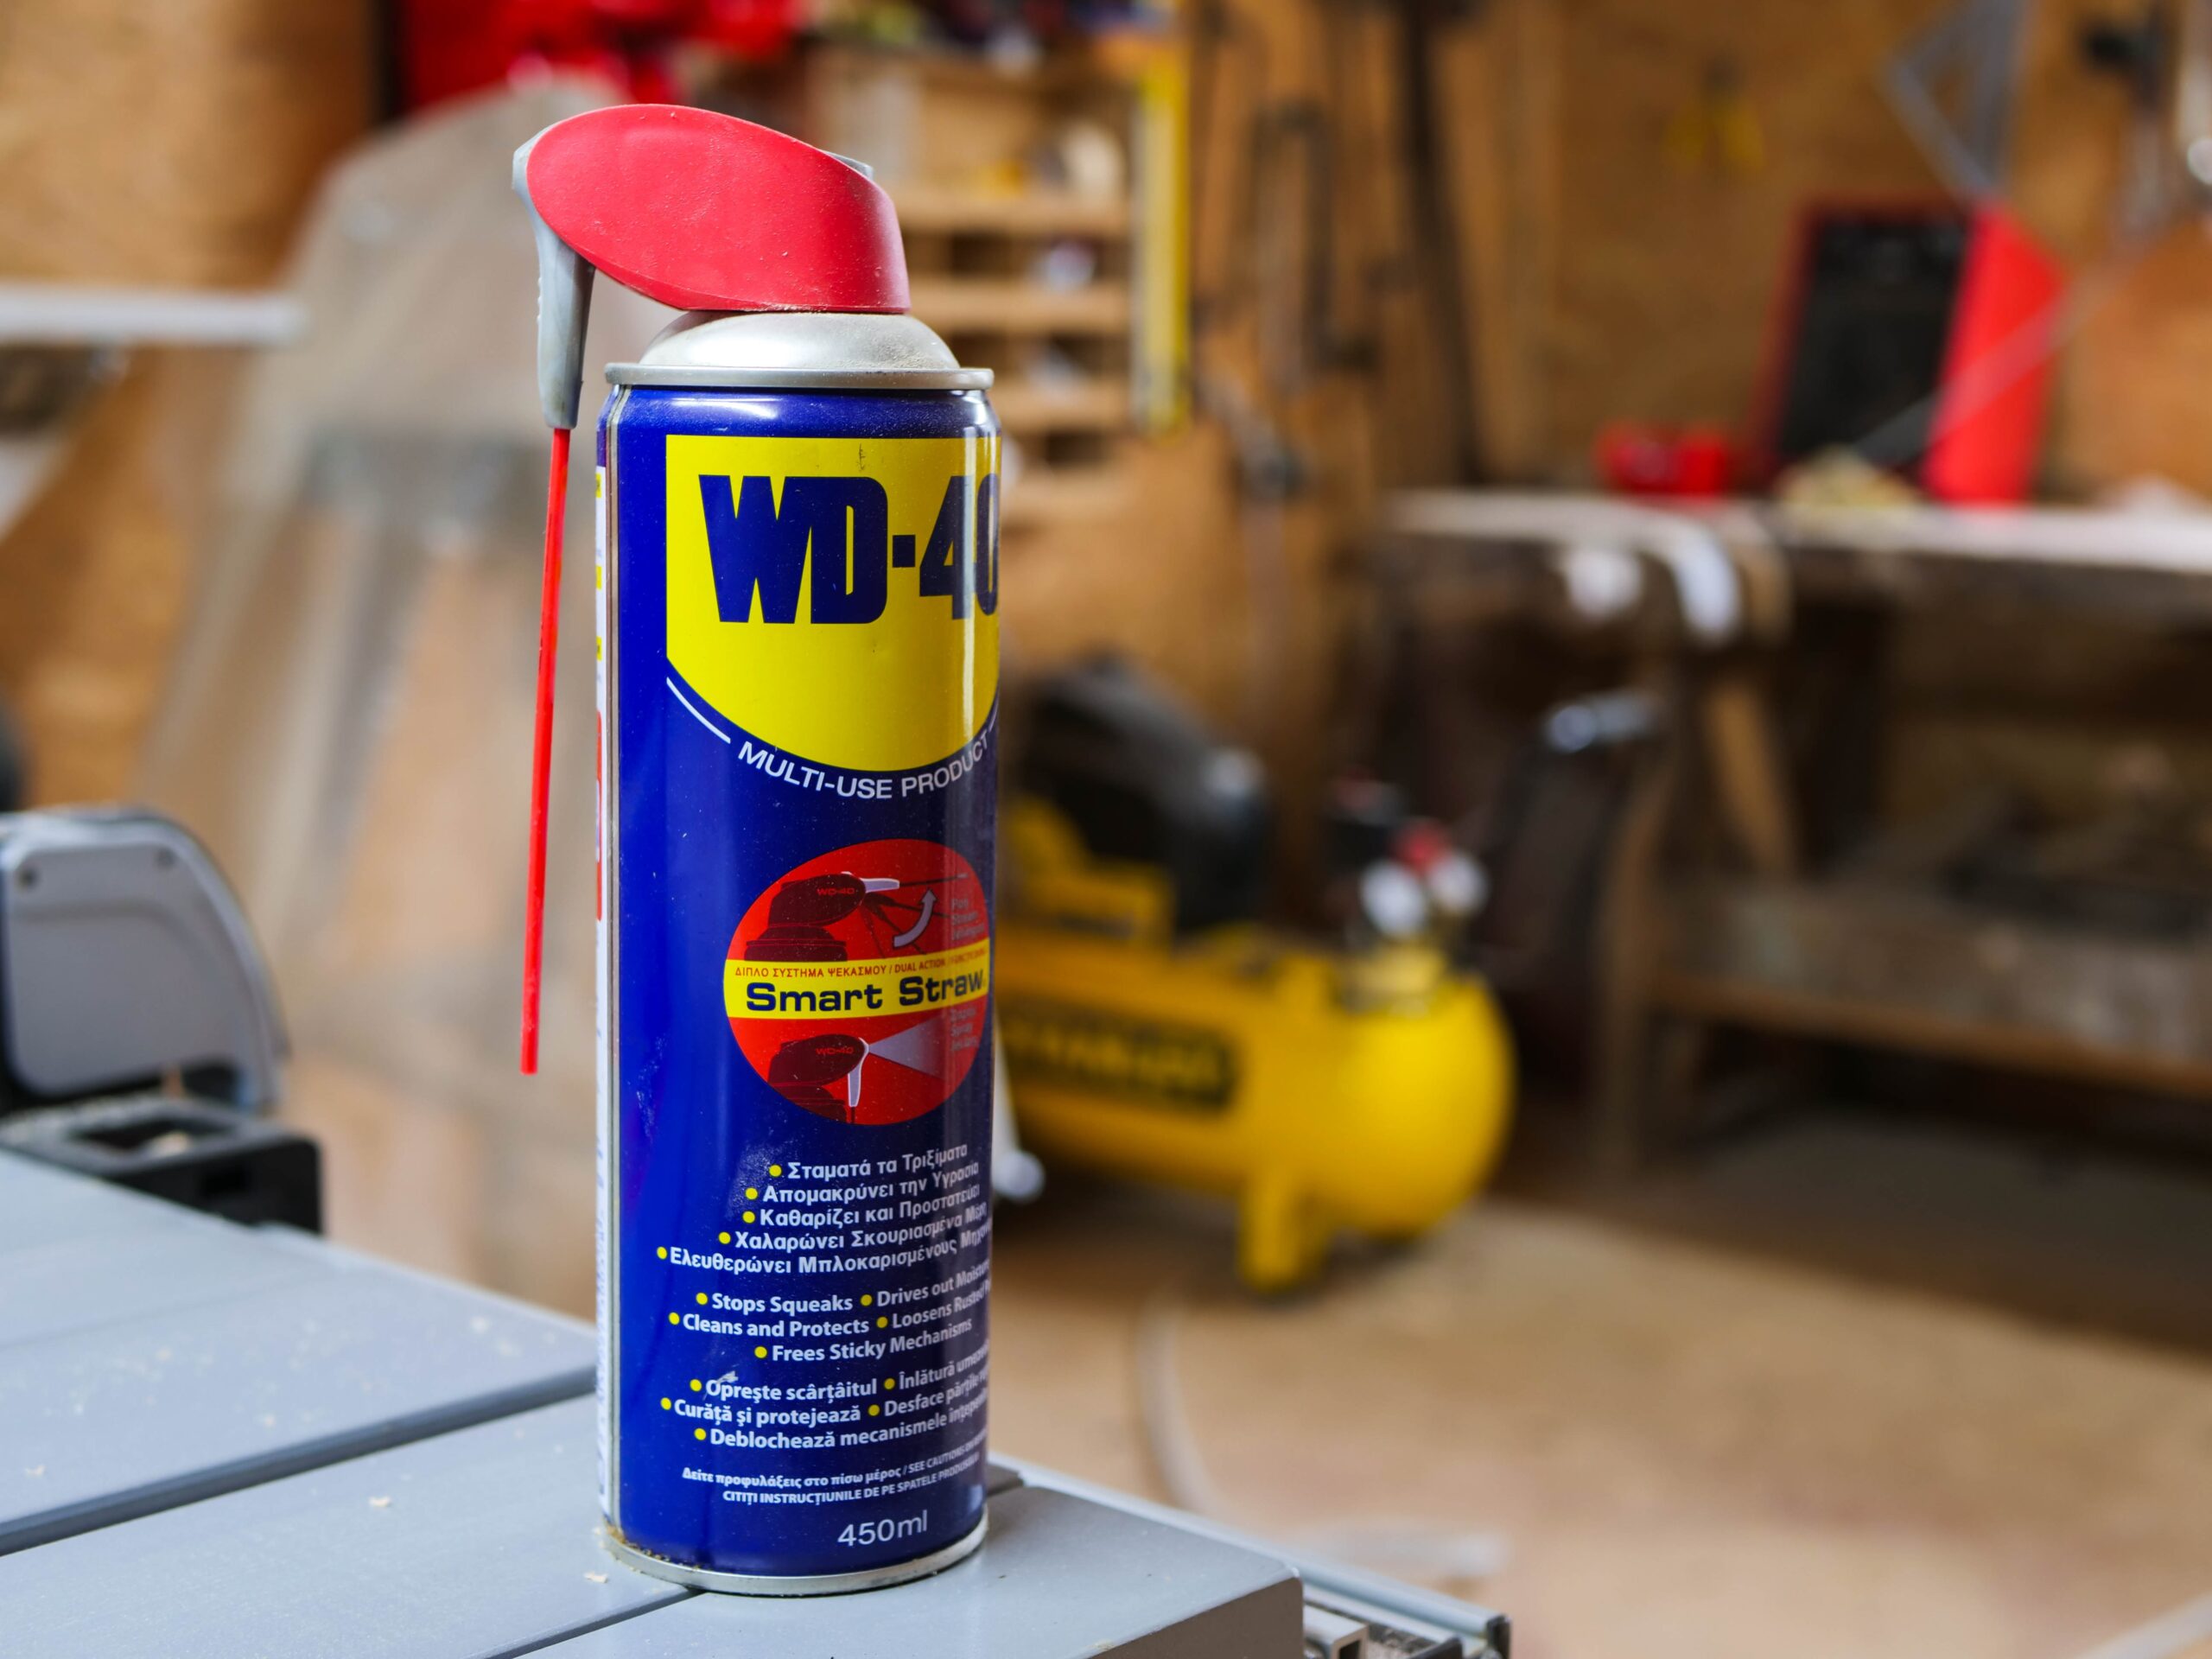 can of WD-40 for WD-40 uses